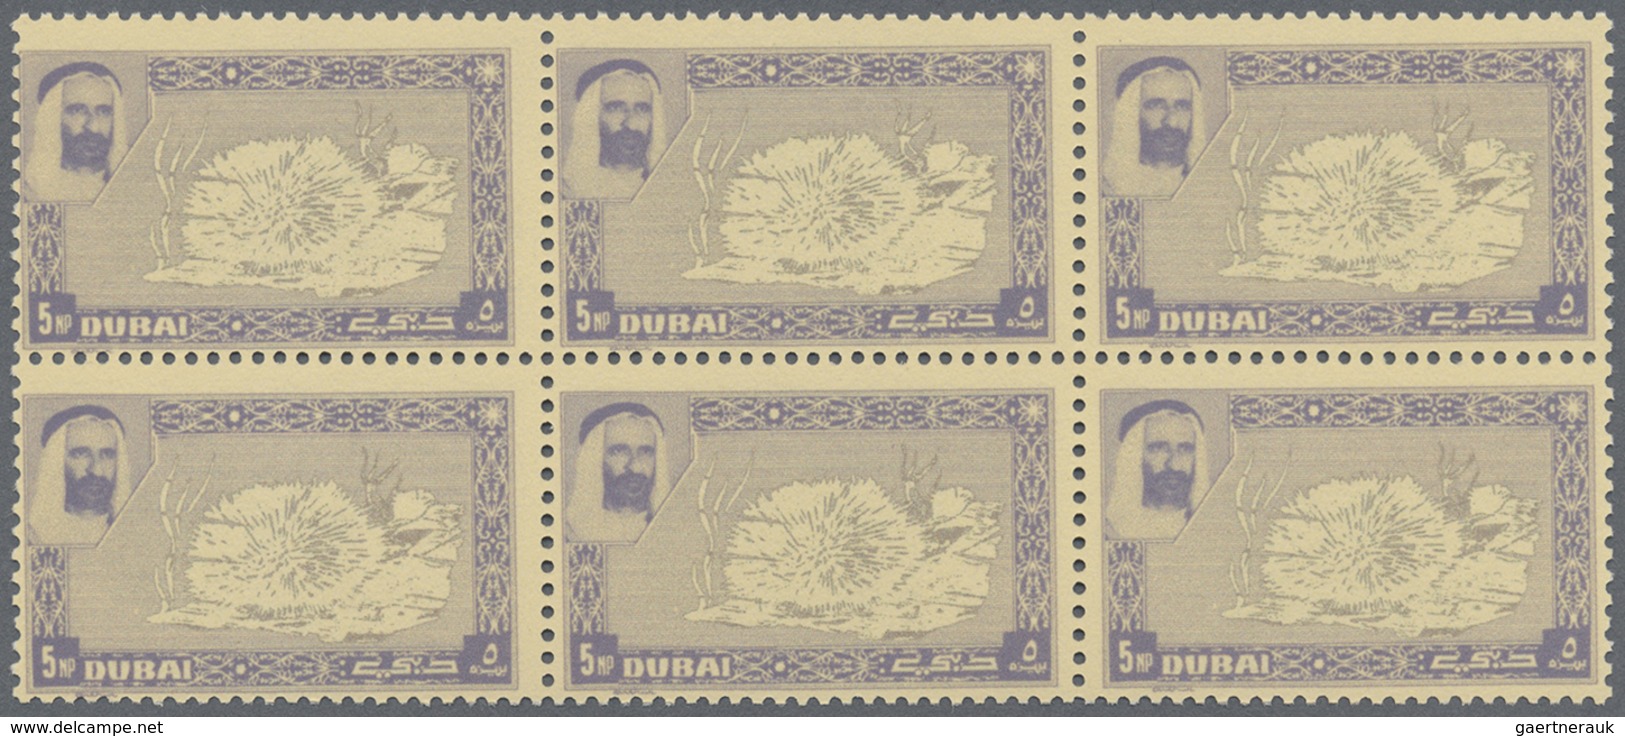 ** Dubai: 1963, Diadema Sea Urchin 5np. With 2nd Printing Of Violet Frame On Gum Side In A Perf. Block - Dubai